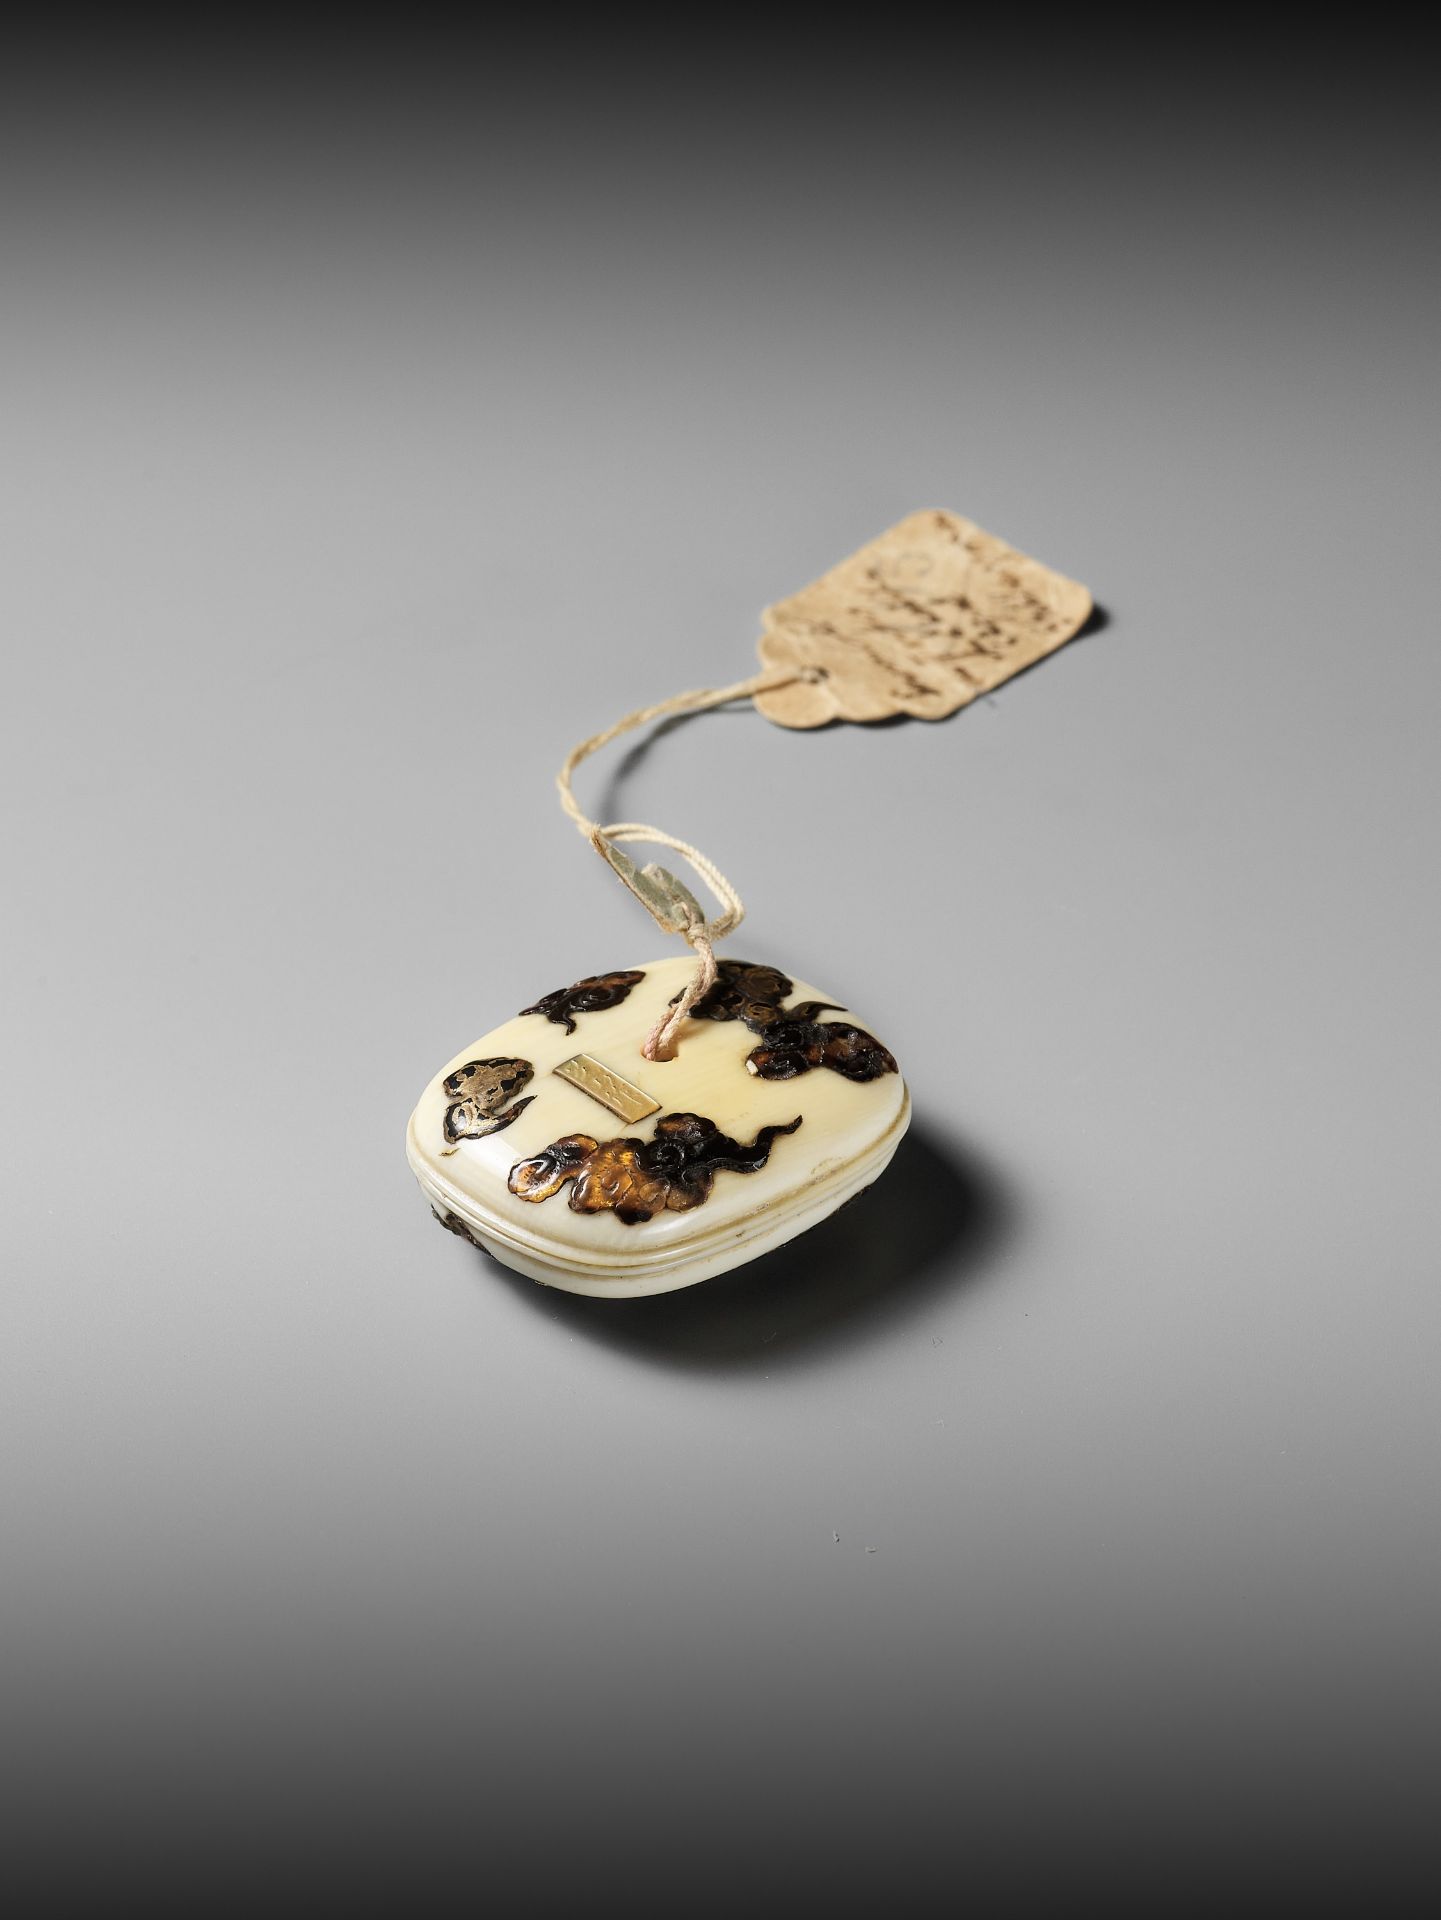 SHIBAYAMA: A FINE LACQUERED AND INLAID IVORY MANJU NETSUKE DEPICTING CRANES AND CLOUDS - Image 4 of 9